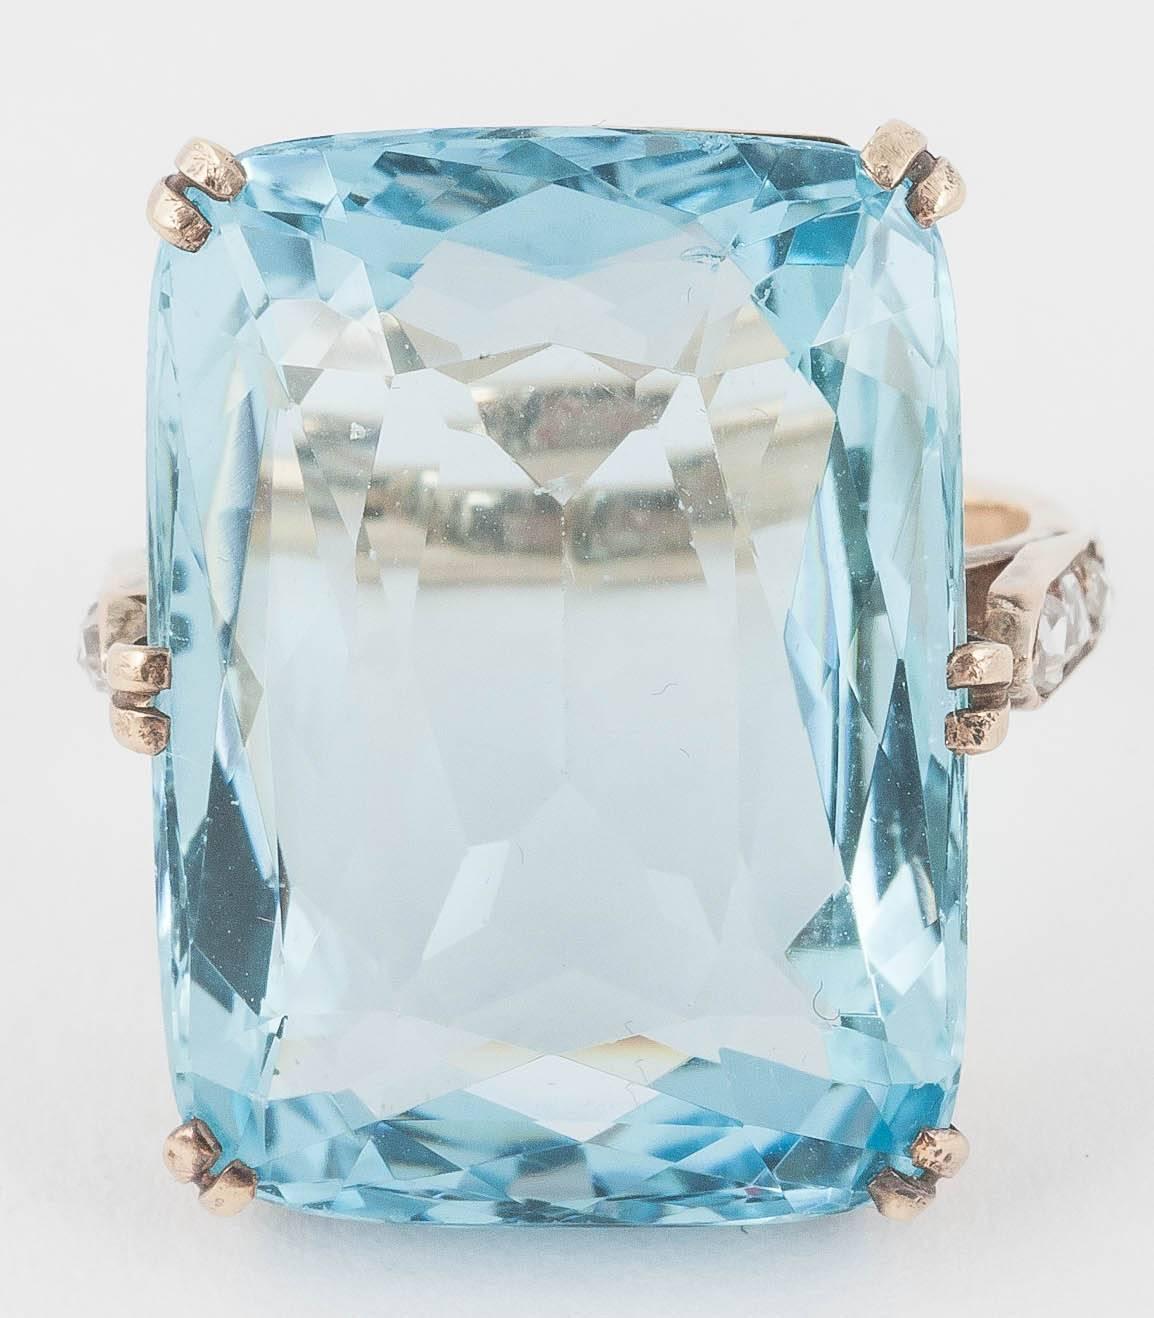 This stunning ring is set in 14ct Gold with 3 rose cut Diamonds on each shoulder.
The central Aquamarine is natural and weighs over 35cts